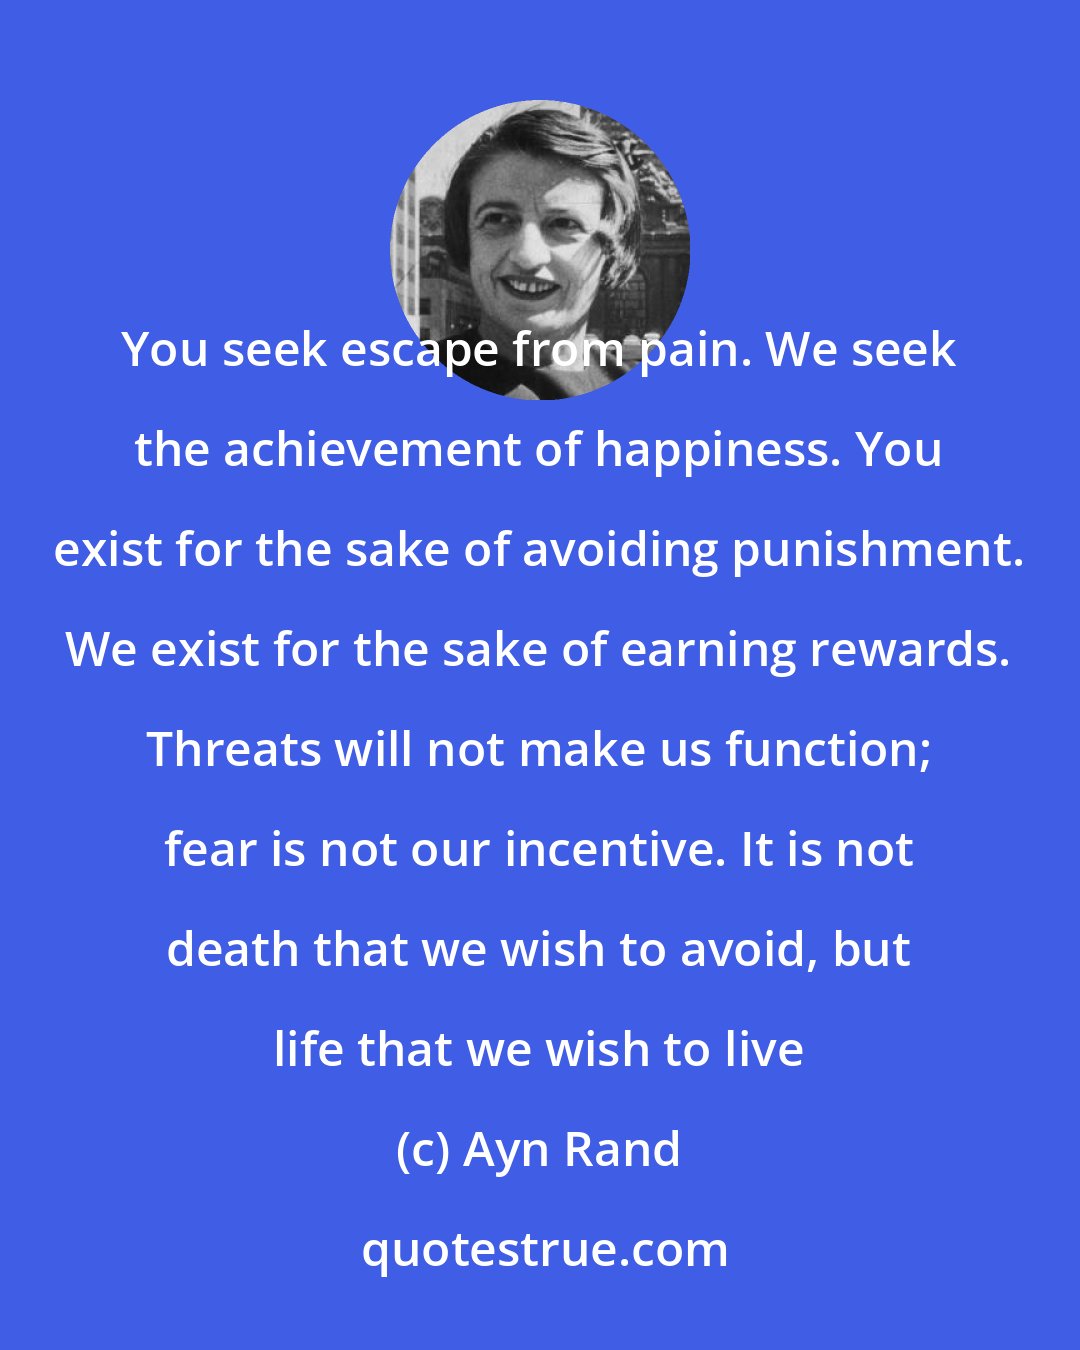 Ayn Rand: You seek escape from pain. We seek the achievement of happiness. You exist for the sake of avoiding punishment. We exist for the sake of earning rewards. Threats will not make us function; fear is not our incentive. It is not death that we wish to avoid, but life that we wish to live